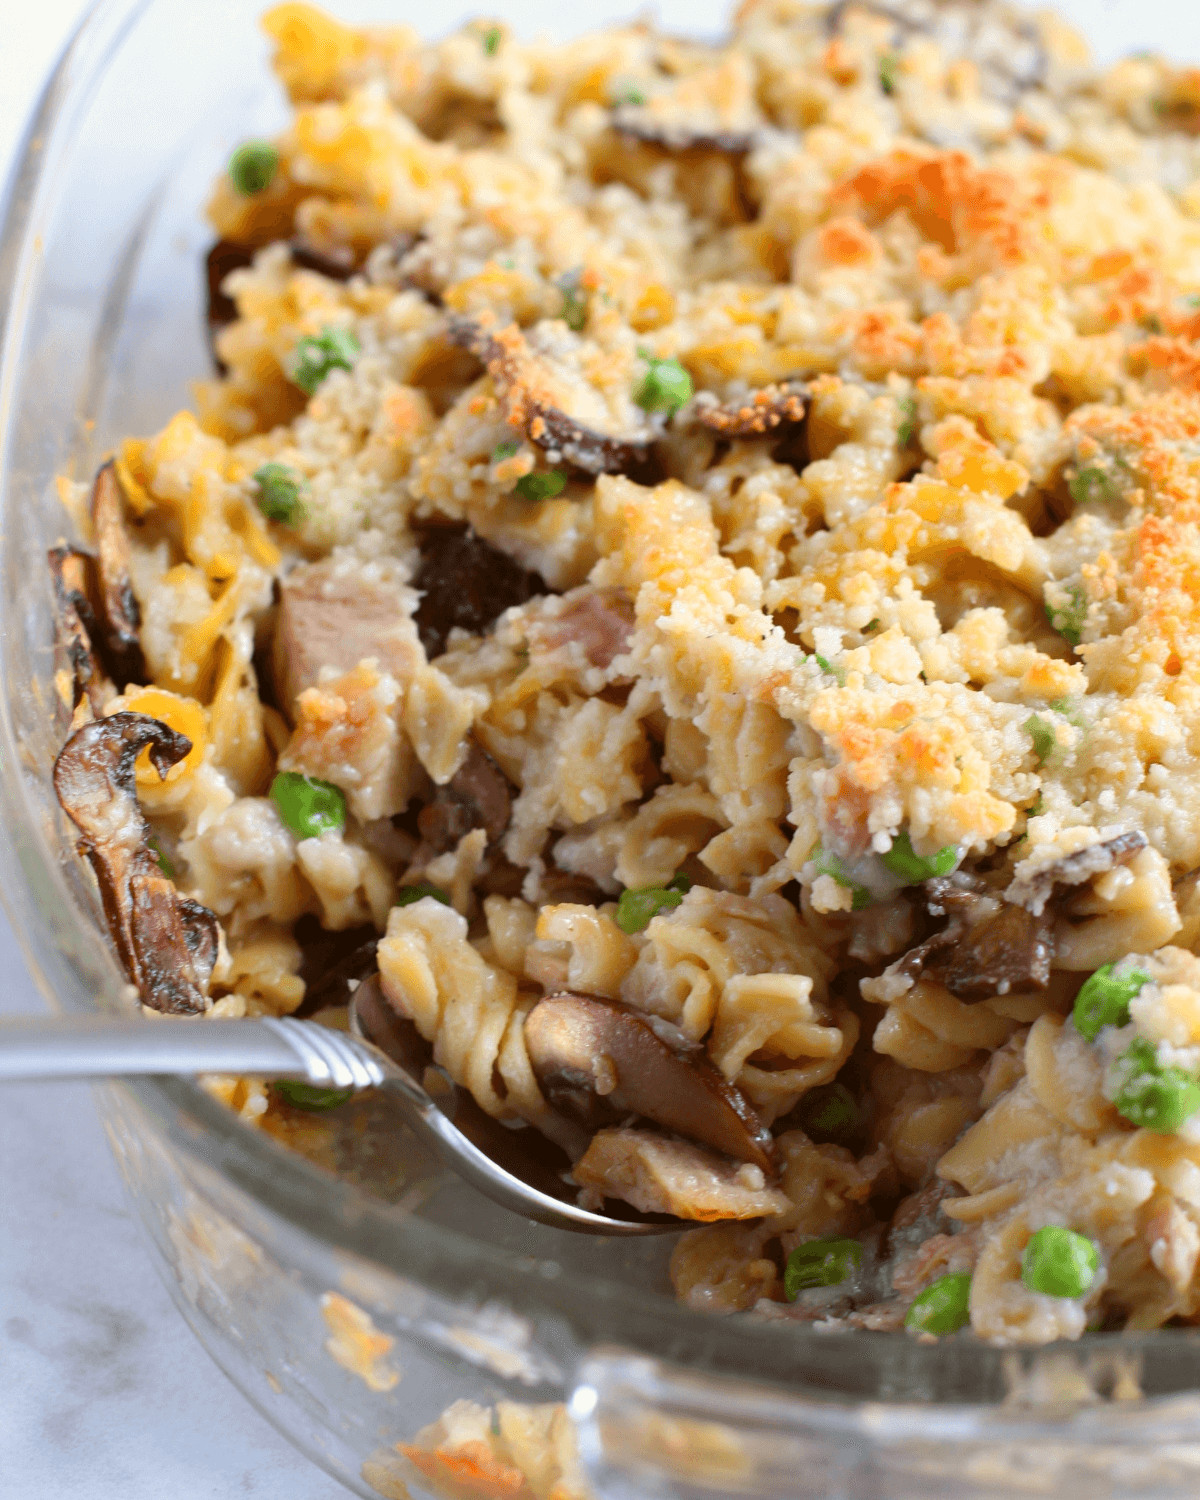 A close-up of casserole with fusilli pasta, peas, and a breadcrumb topping.